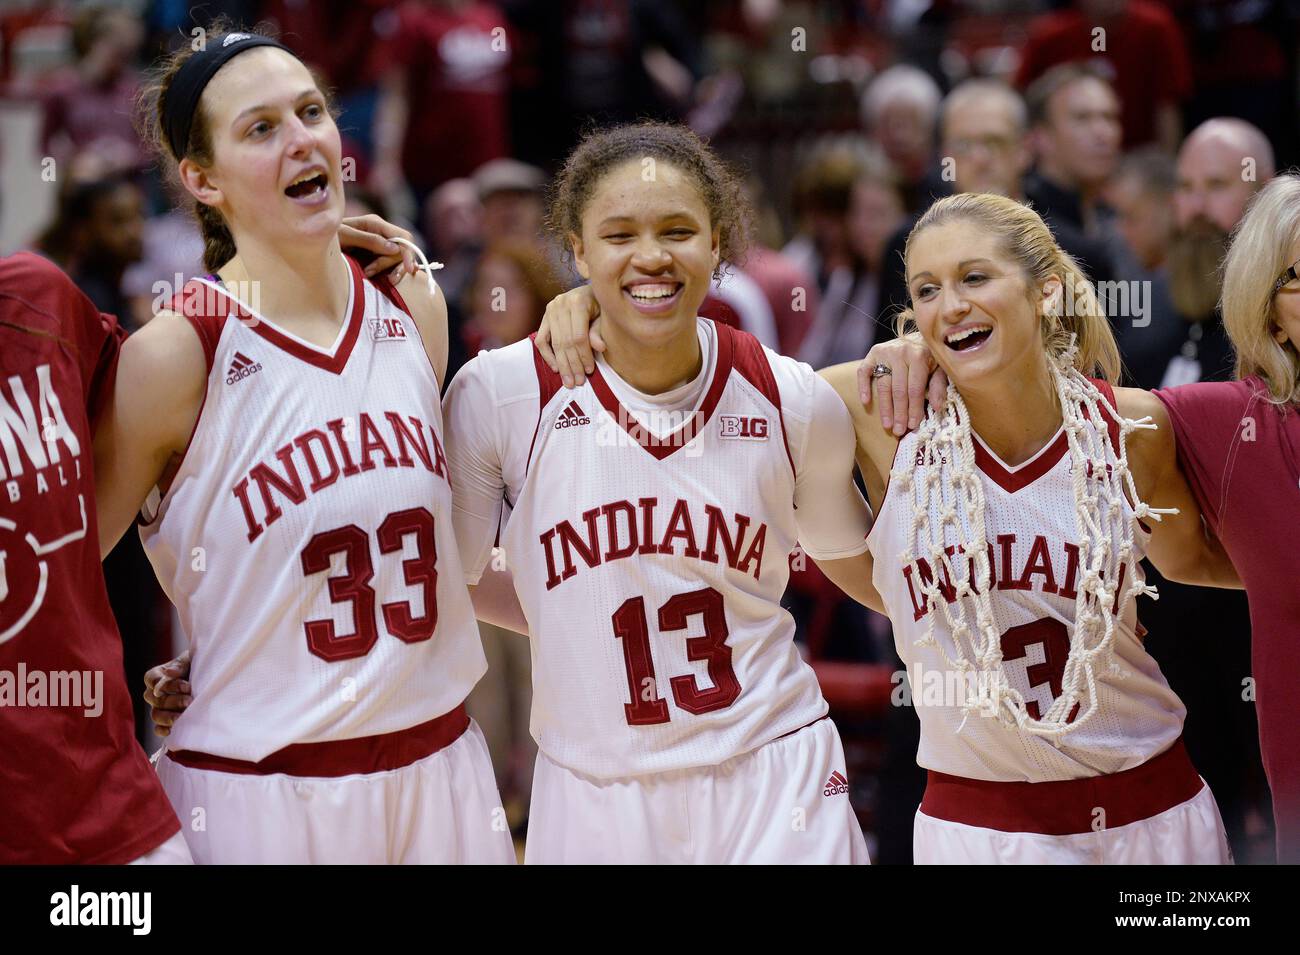 Indiana Hoosiers forward Amanda Cahill (33) Indiana Hoosiers guard Jaelynn  Penn (13) and Indiana Hoosiers guard Tyra Buss (3) sing the alma mater  after the Indiana Virginia Tech WNIT college basketball game